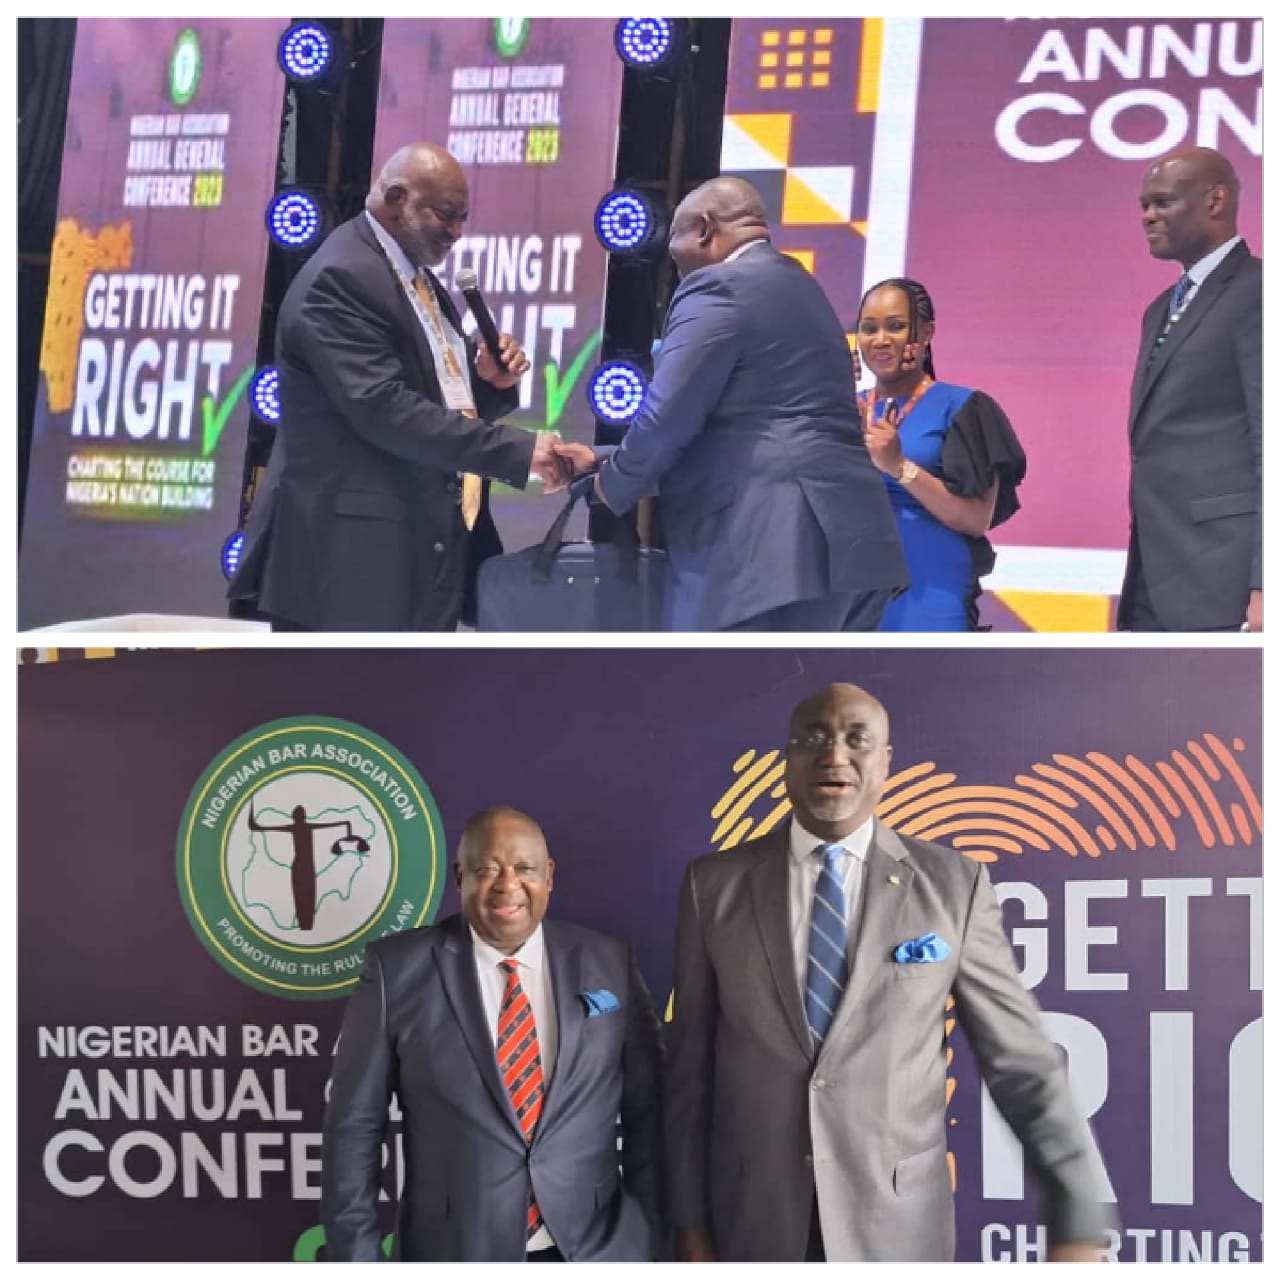 MANGU TIC CHAIRMAN HON. ARTU CONGRATULATES GOVERNOR MUTFWANG OVER HIS EMERGENCE AS NBA AMBASSADOR AT THE ONGOING 2023 ANNUAL GENERAL CONFERENCE OF NBA.